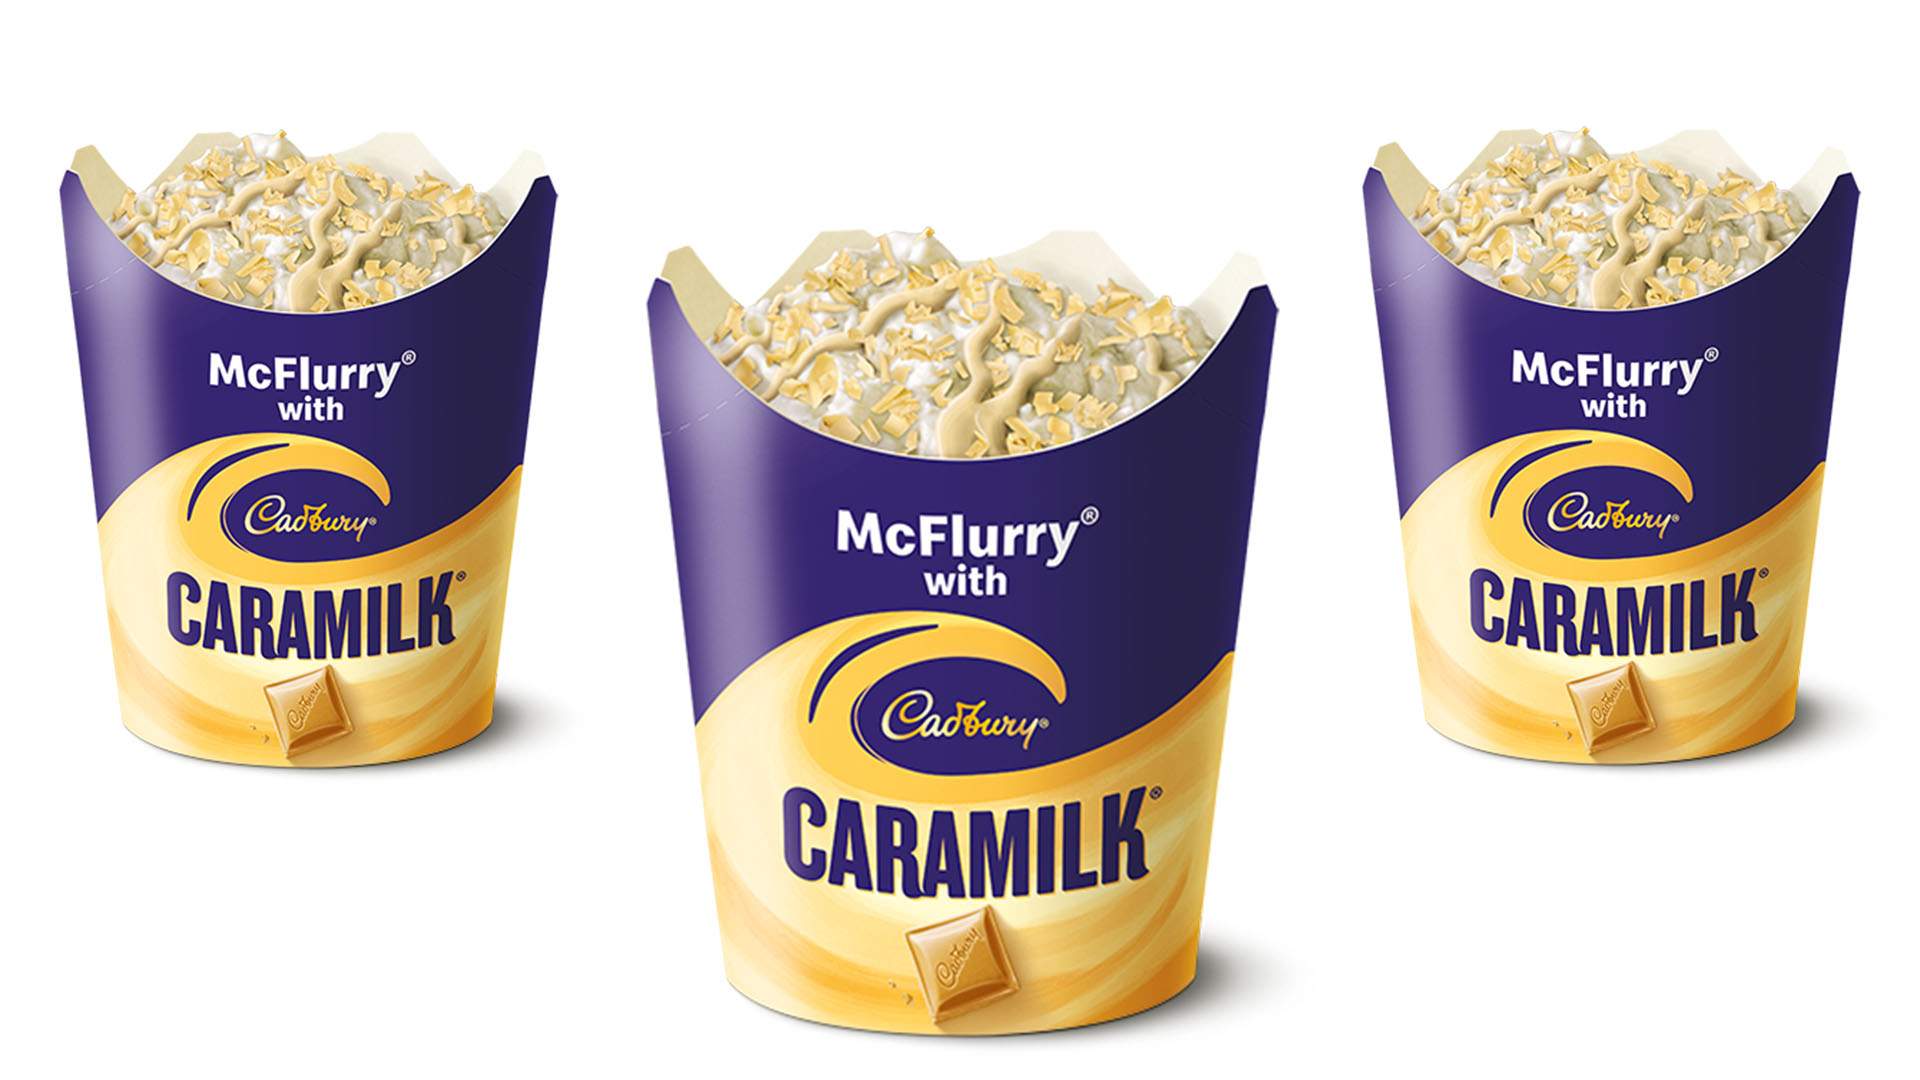 McDonald's Has Launched a Limited-Edition Caramilk McFlurry So That's Your Next Dessert Sorted